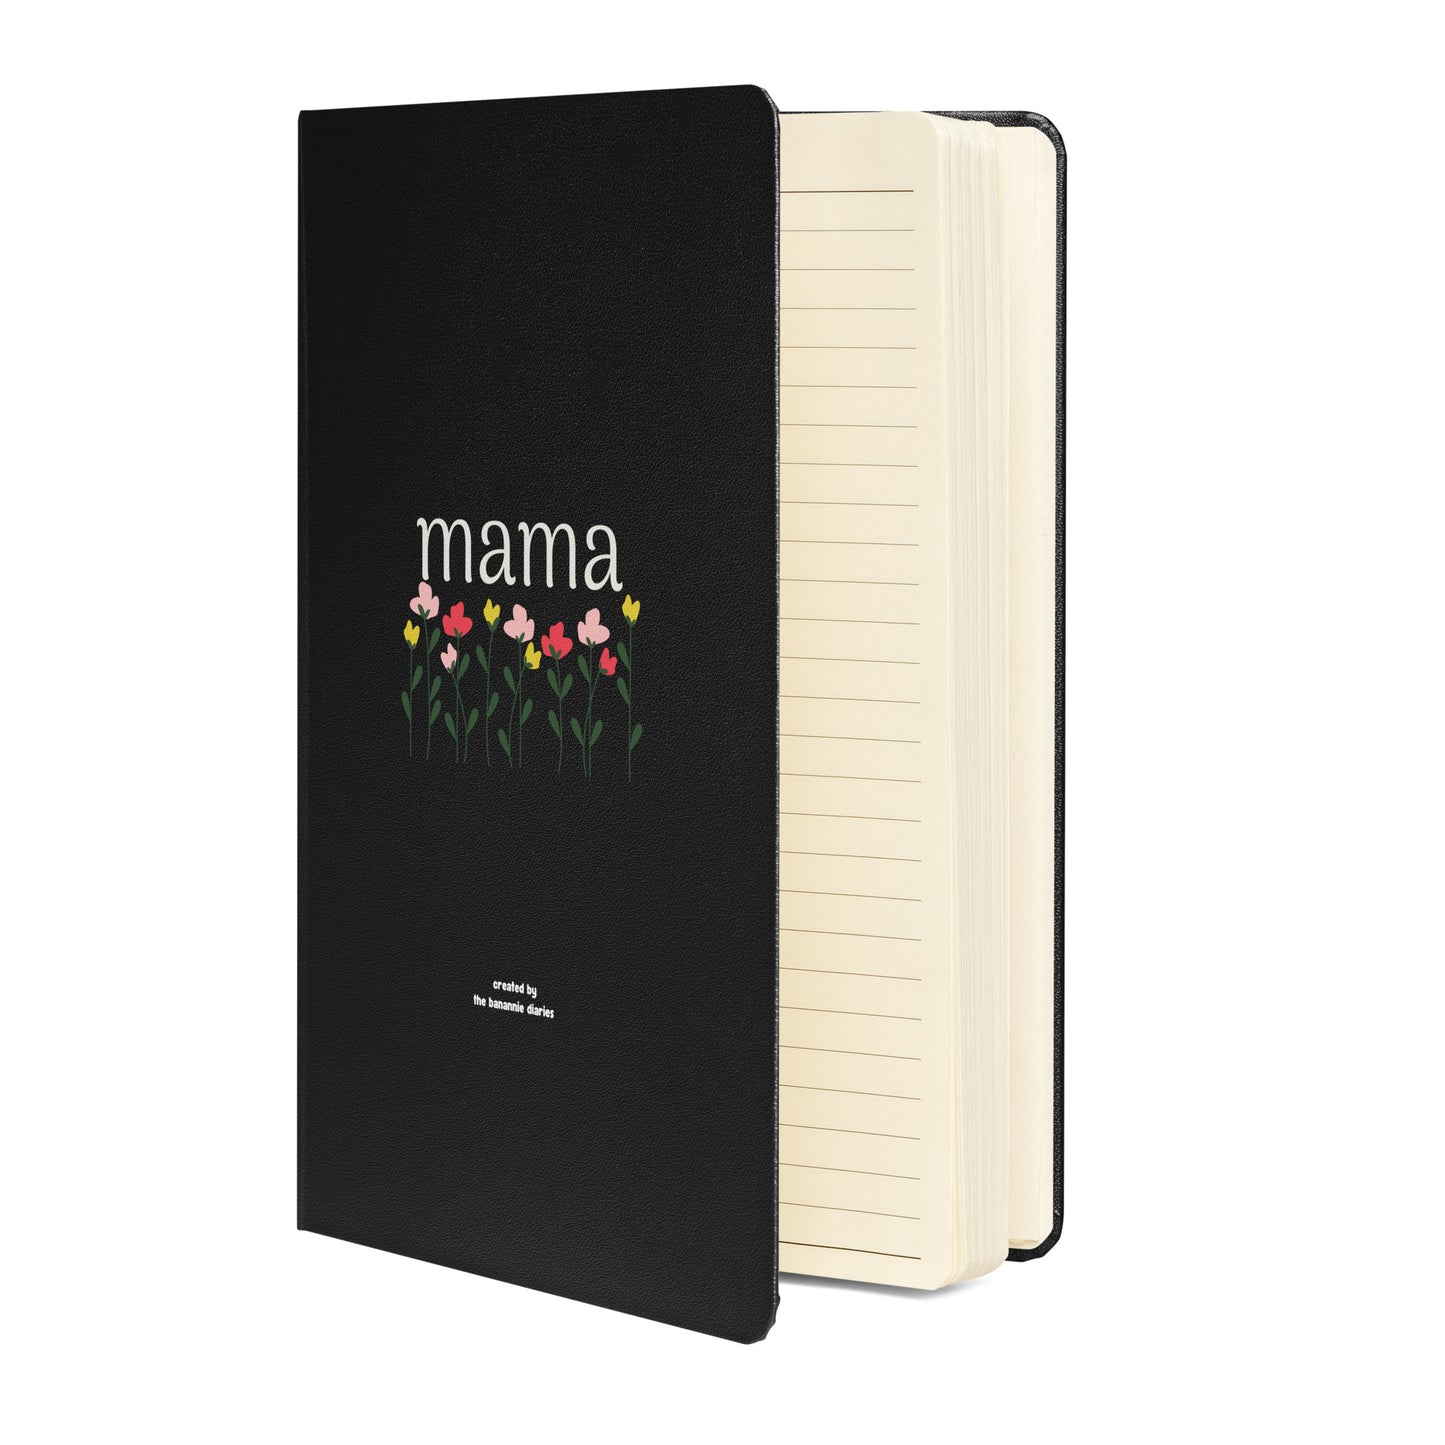 Mama - Hardcover Bound Notebook, 80 Pages, By The Banannie Diaries